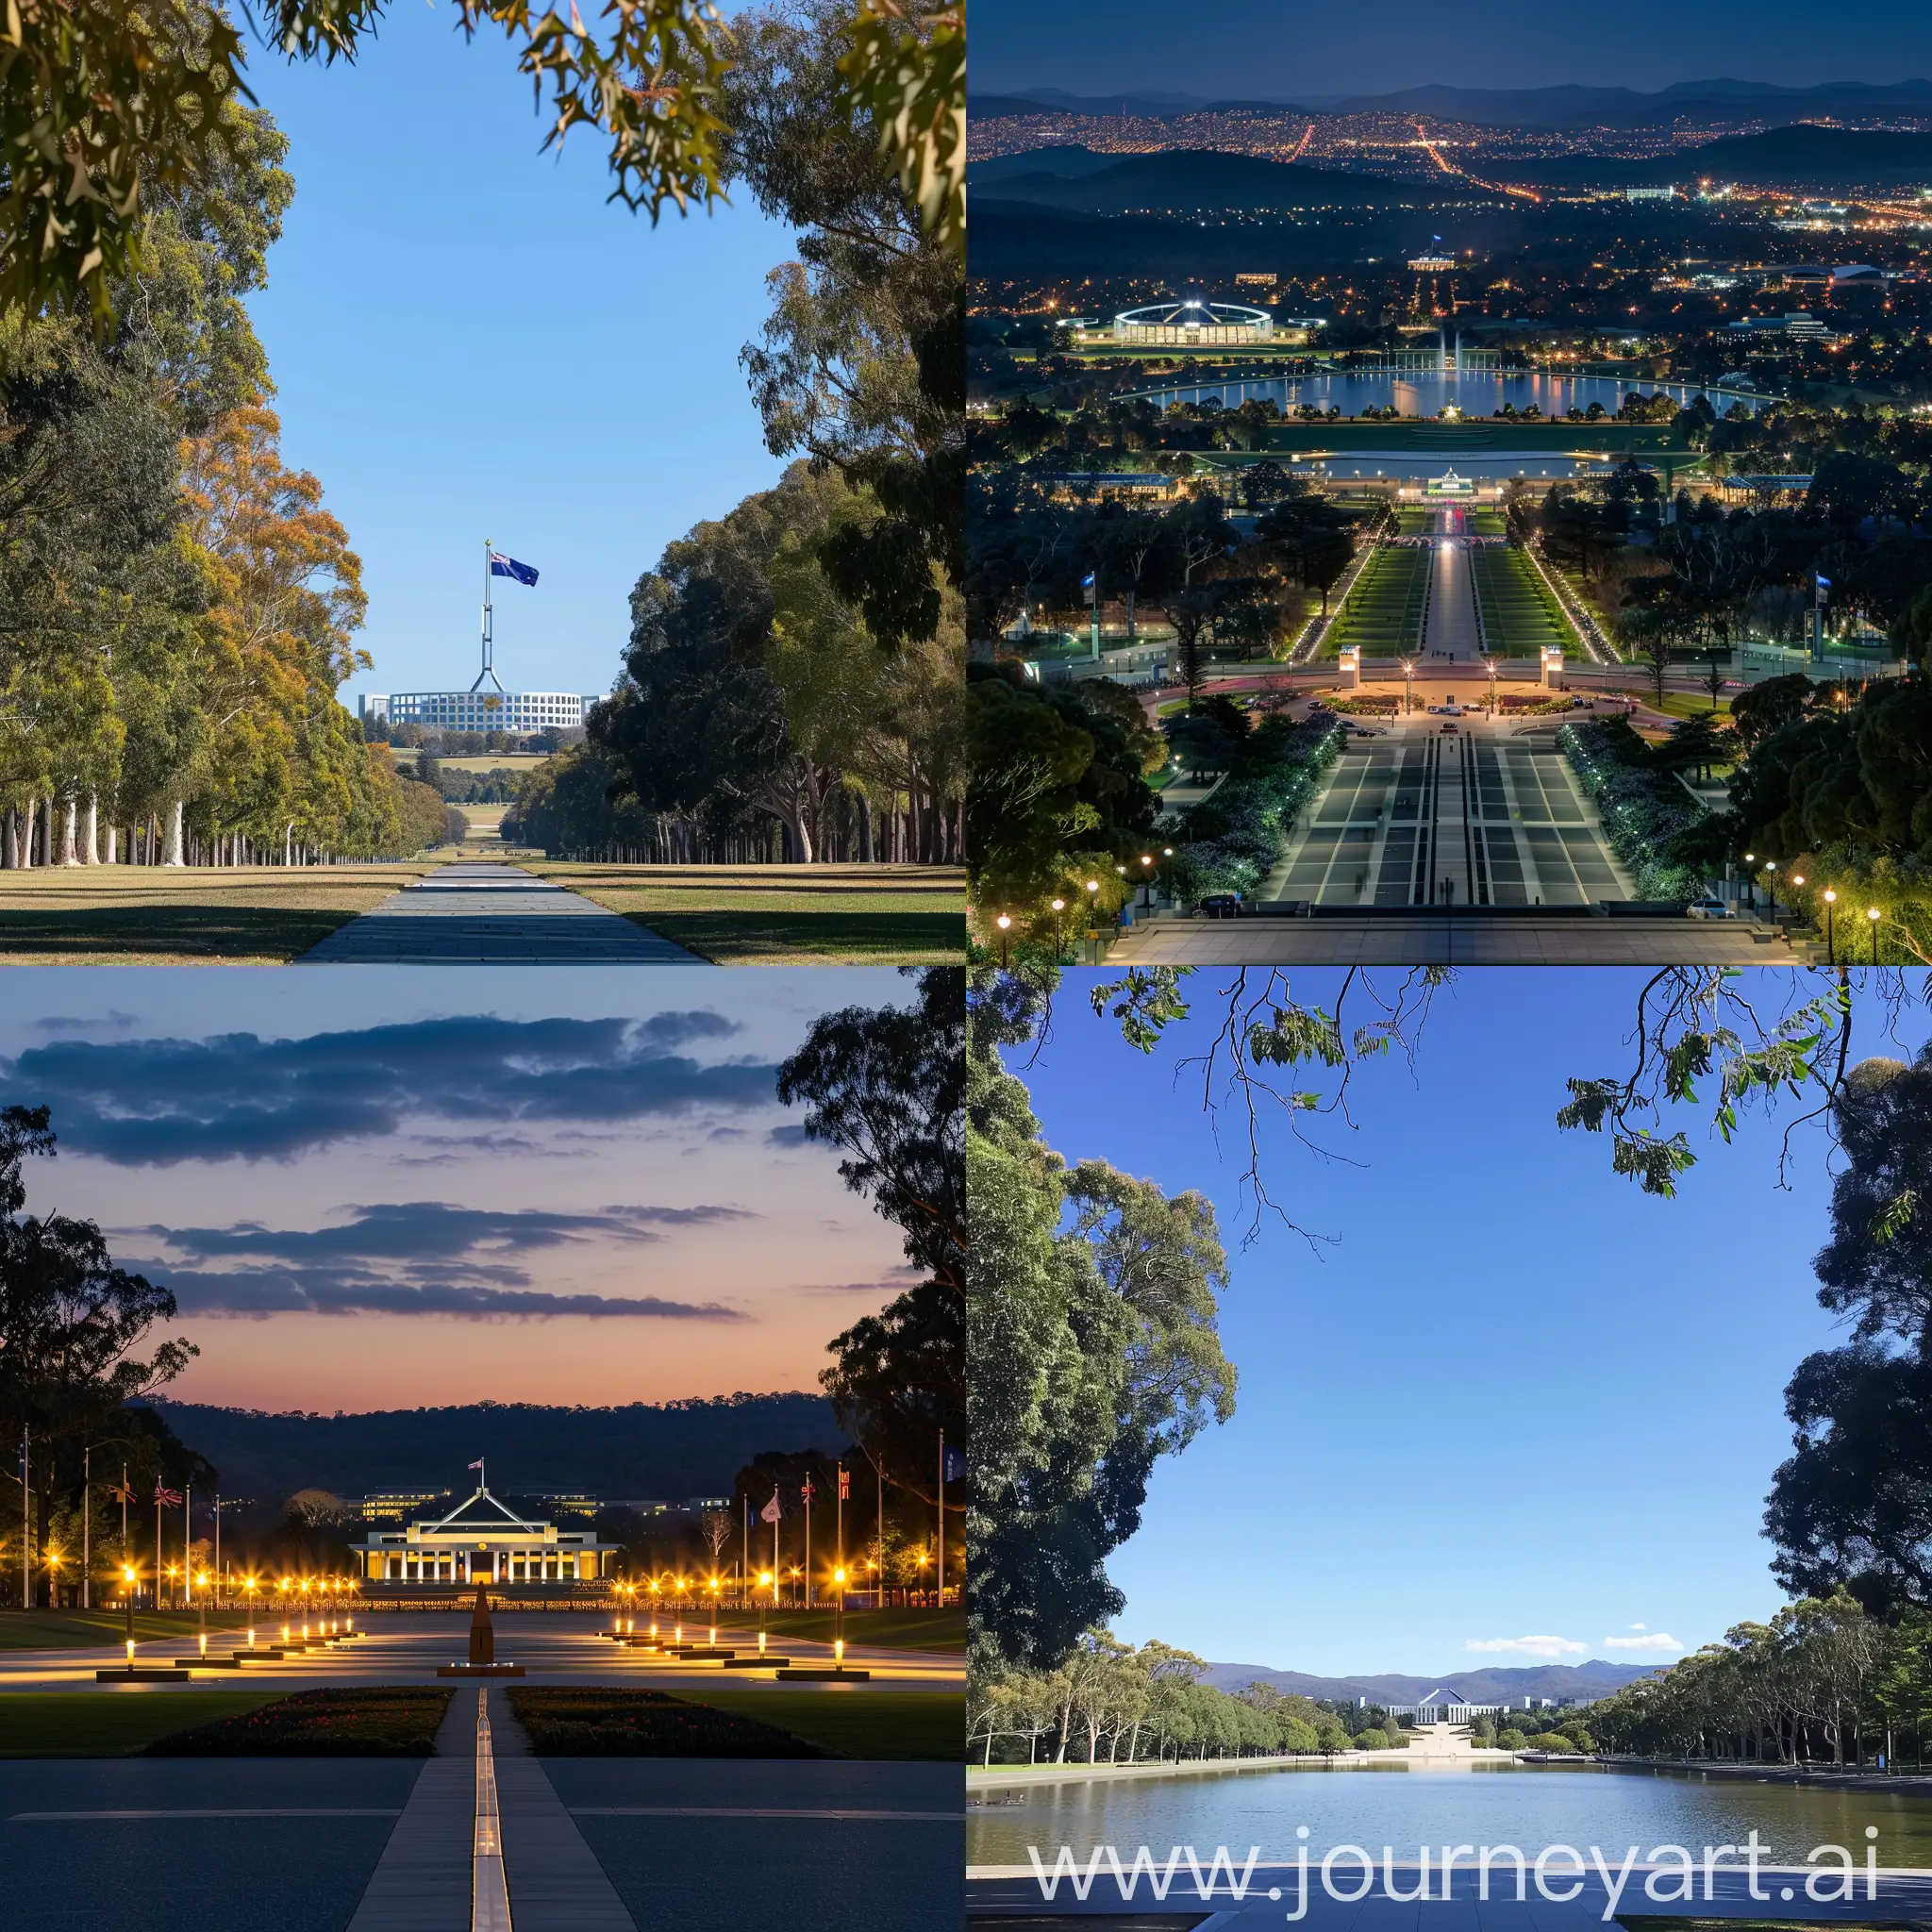 Canberra-Day-Celebration-Festive-Atmosphere-with-Vibrant-Colors-and-Community-Gathering